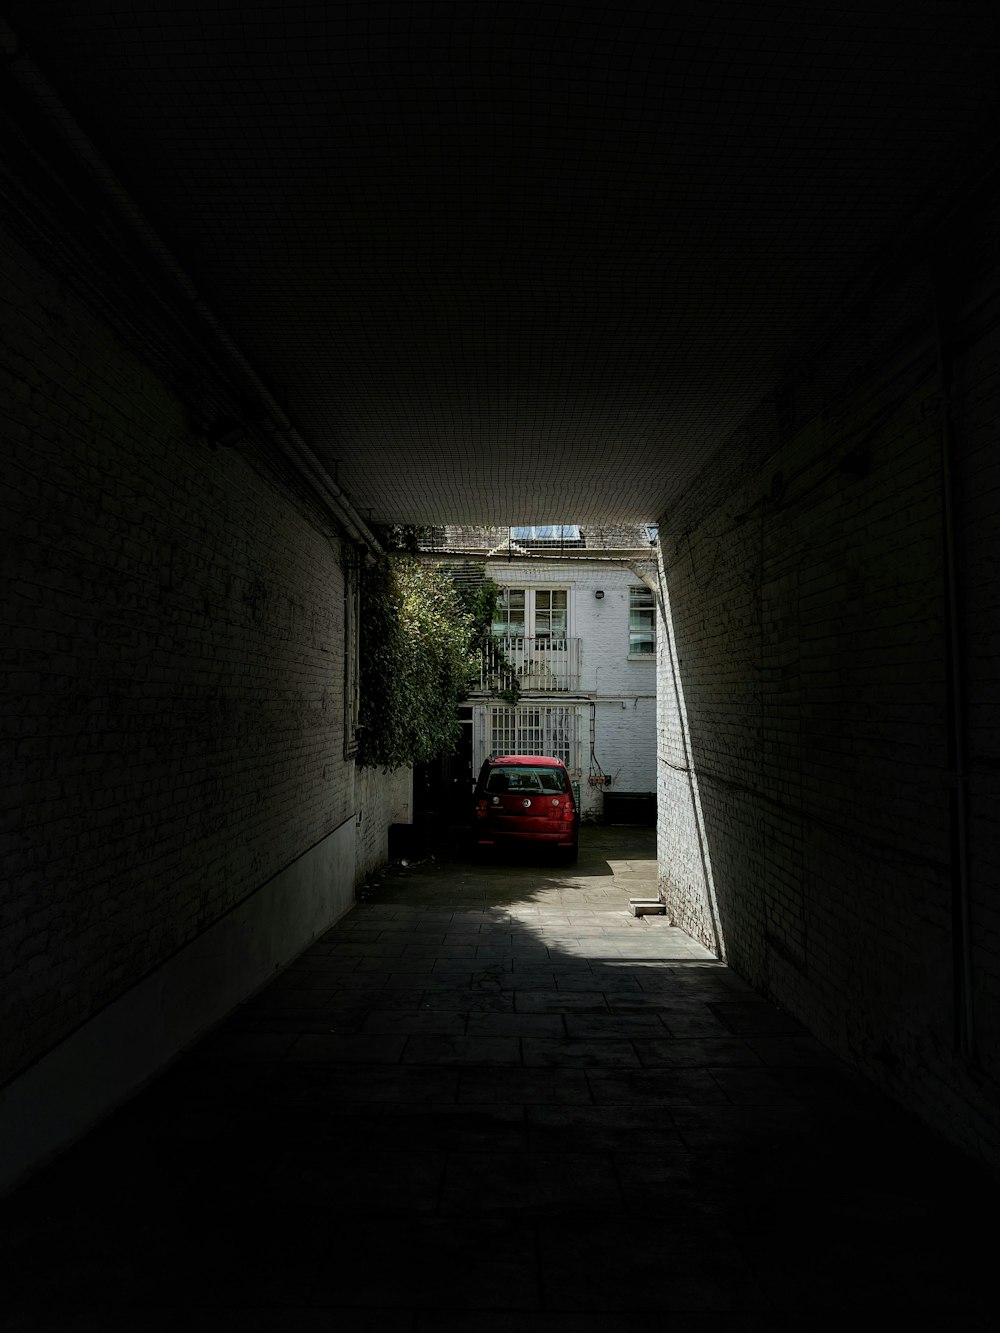 a red car is parked in a dark alley